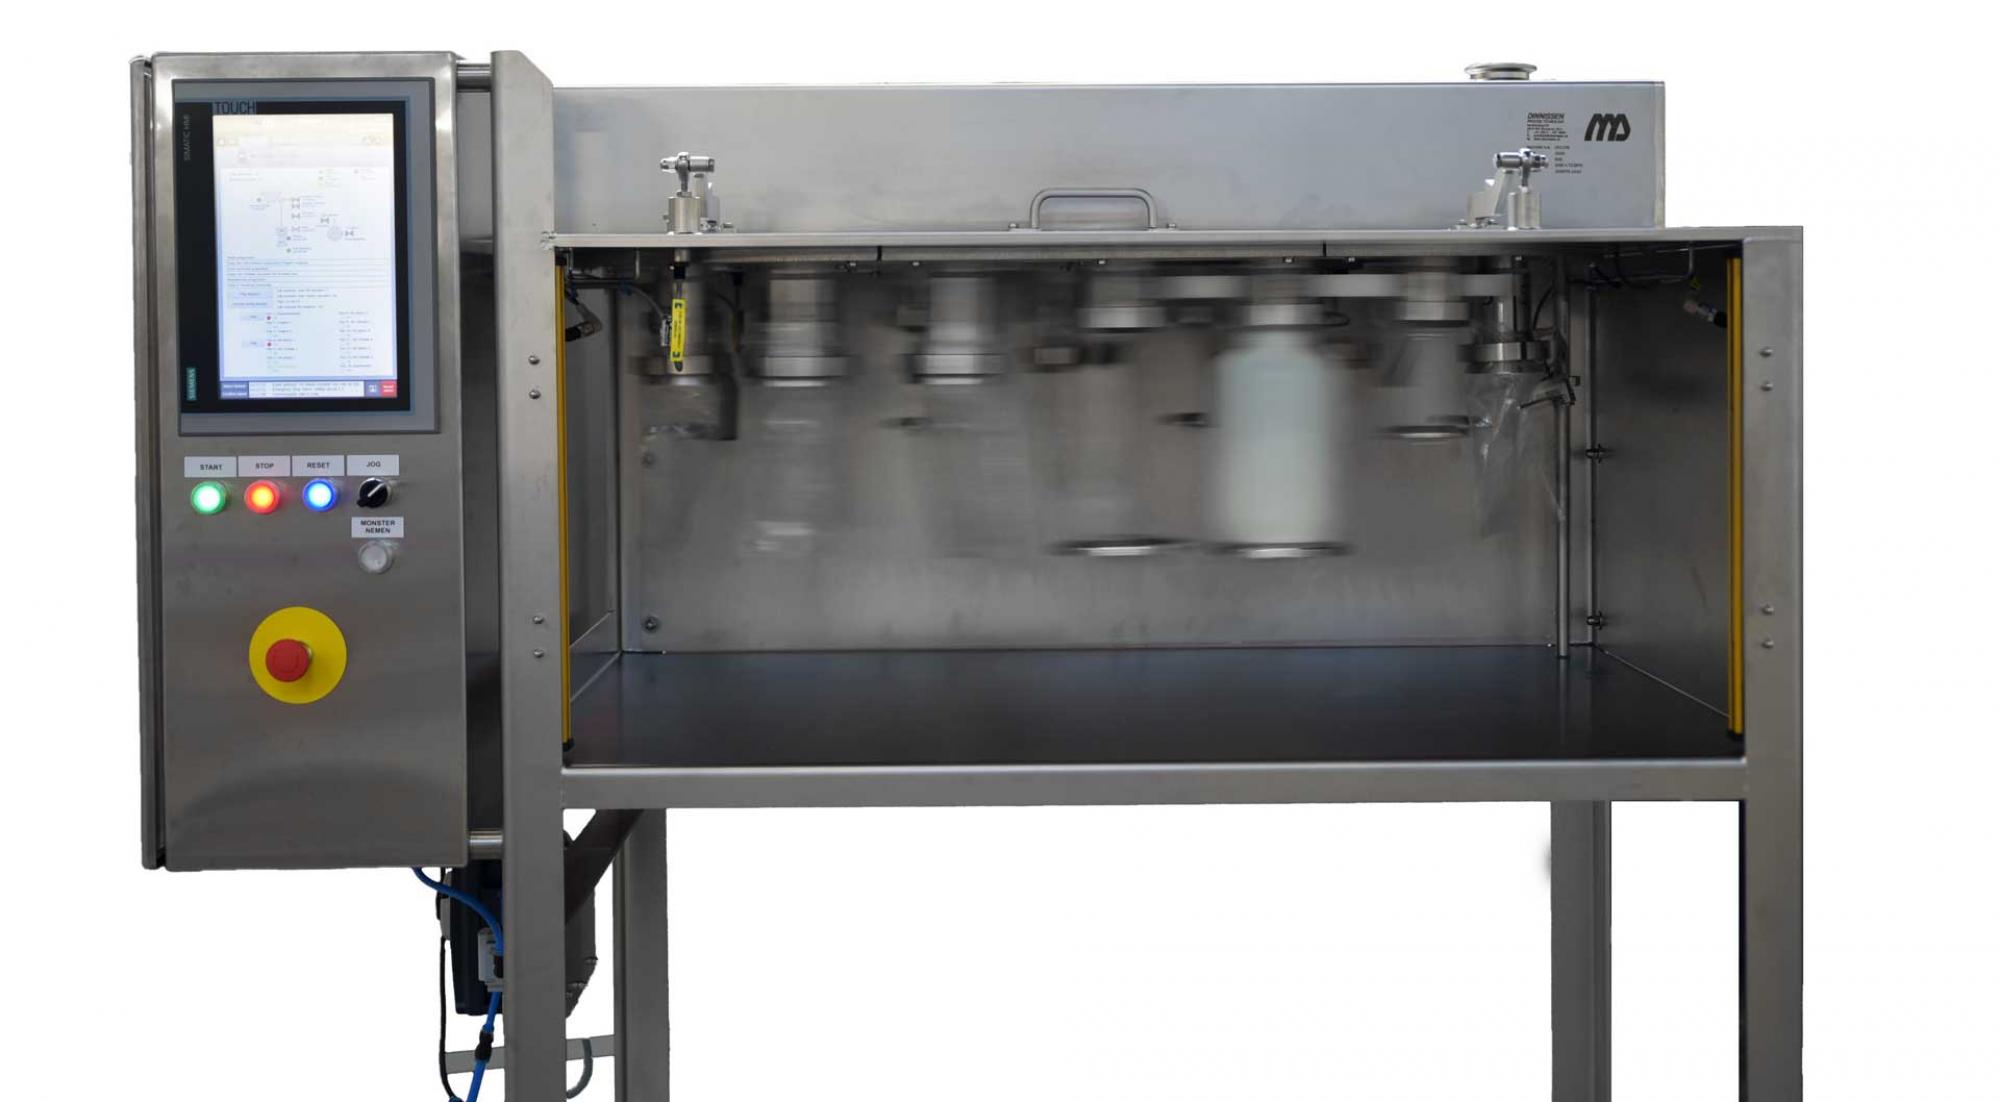 Dinnissen Multisize Sample Carousel roterende samplecontainers